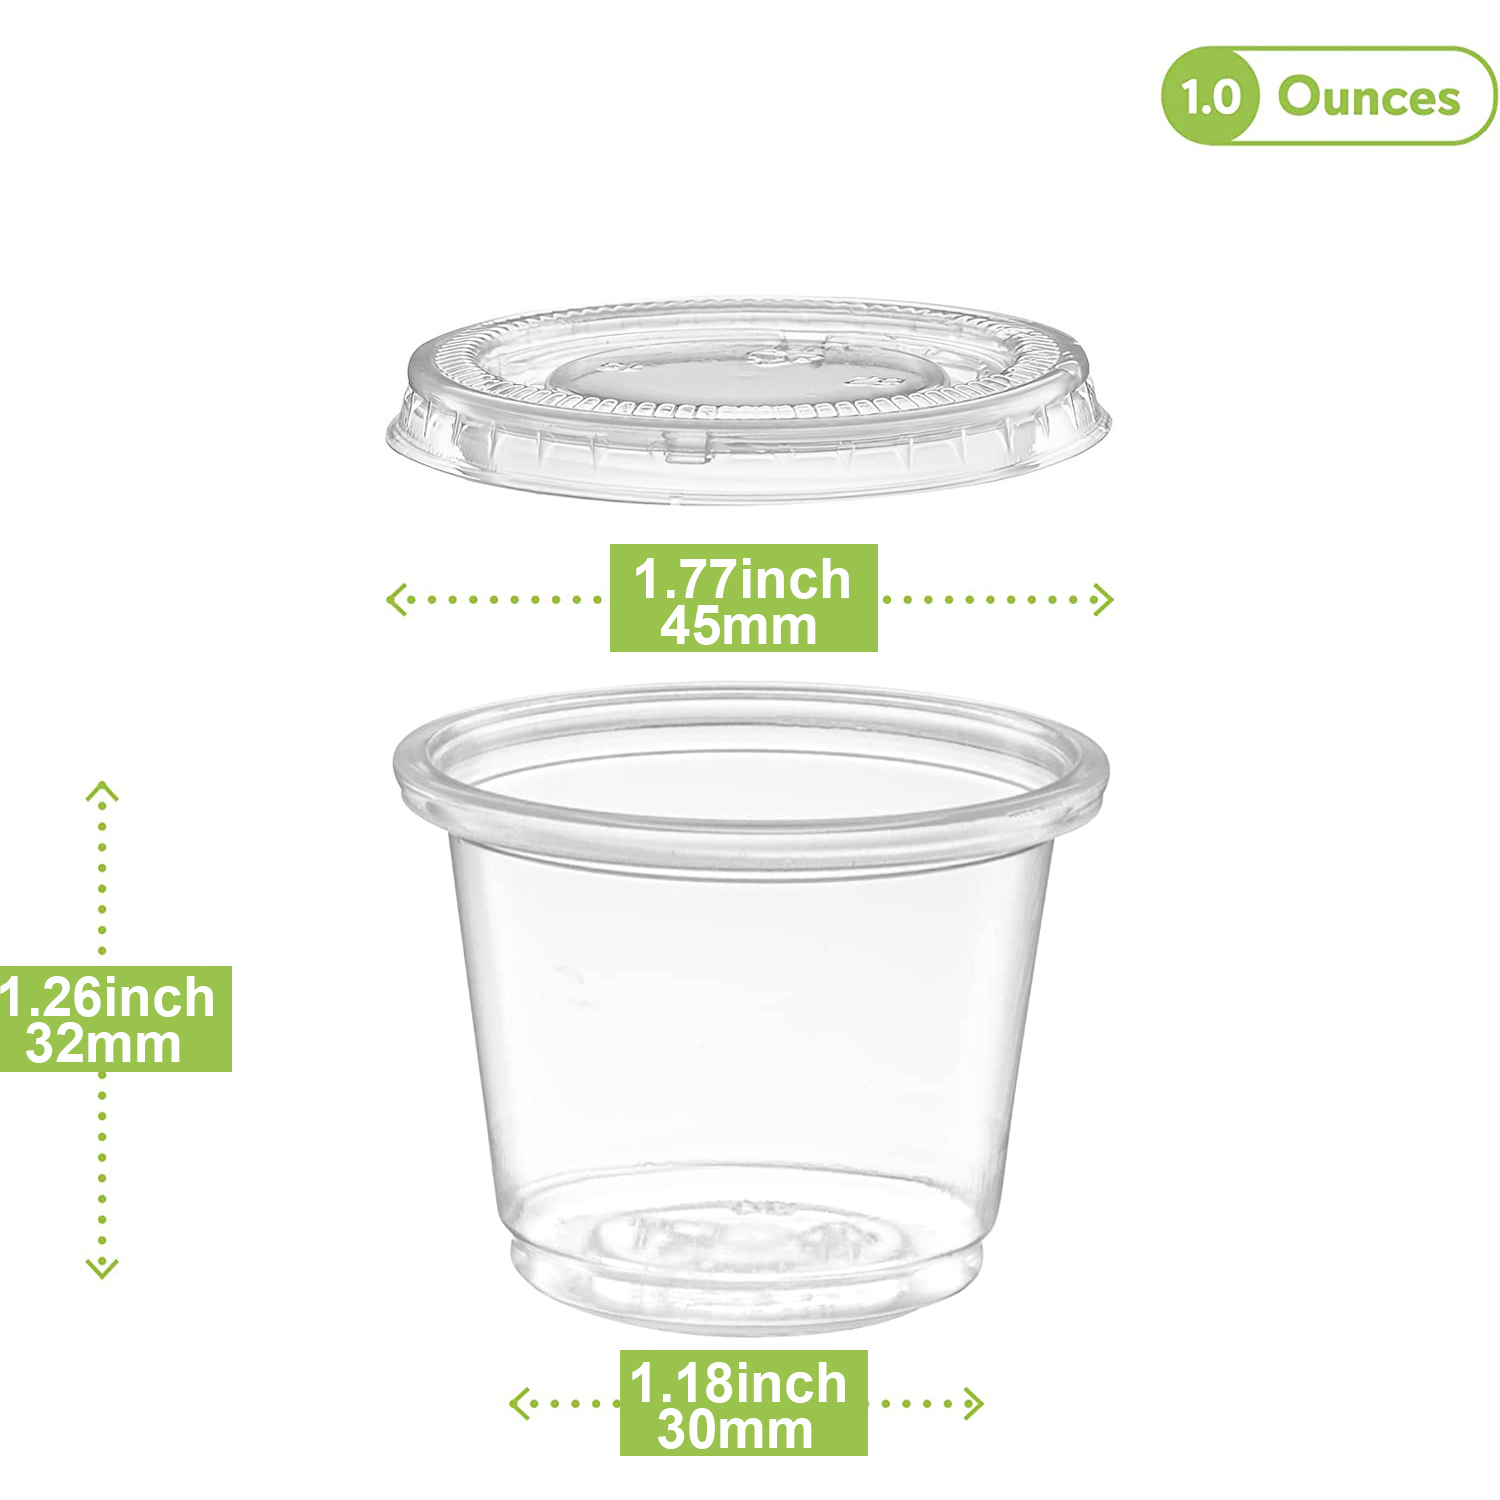 ICYANG 50 Sets 1.5 Ounce Plastic Jello Shot Cups Portion Cups Souffle  Condiment Sampling Cup with Li…See more ICYANG 50 Sets 1.5 Ounce Plastic  Jello